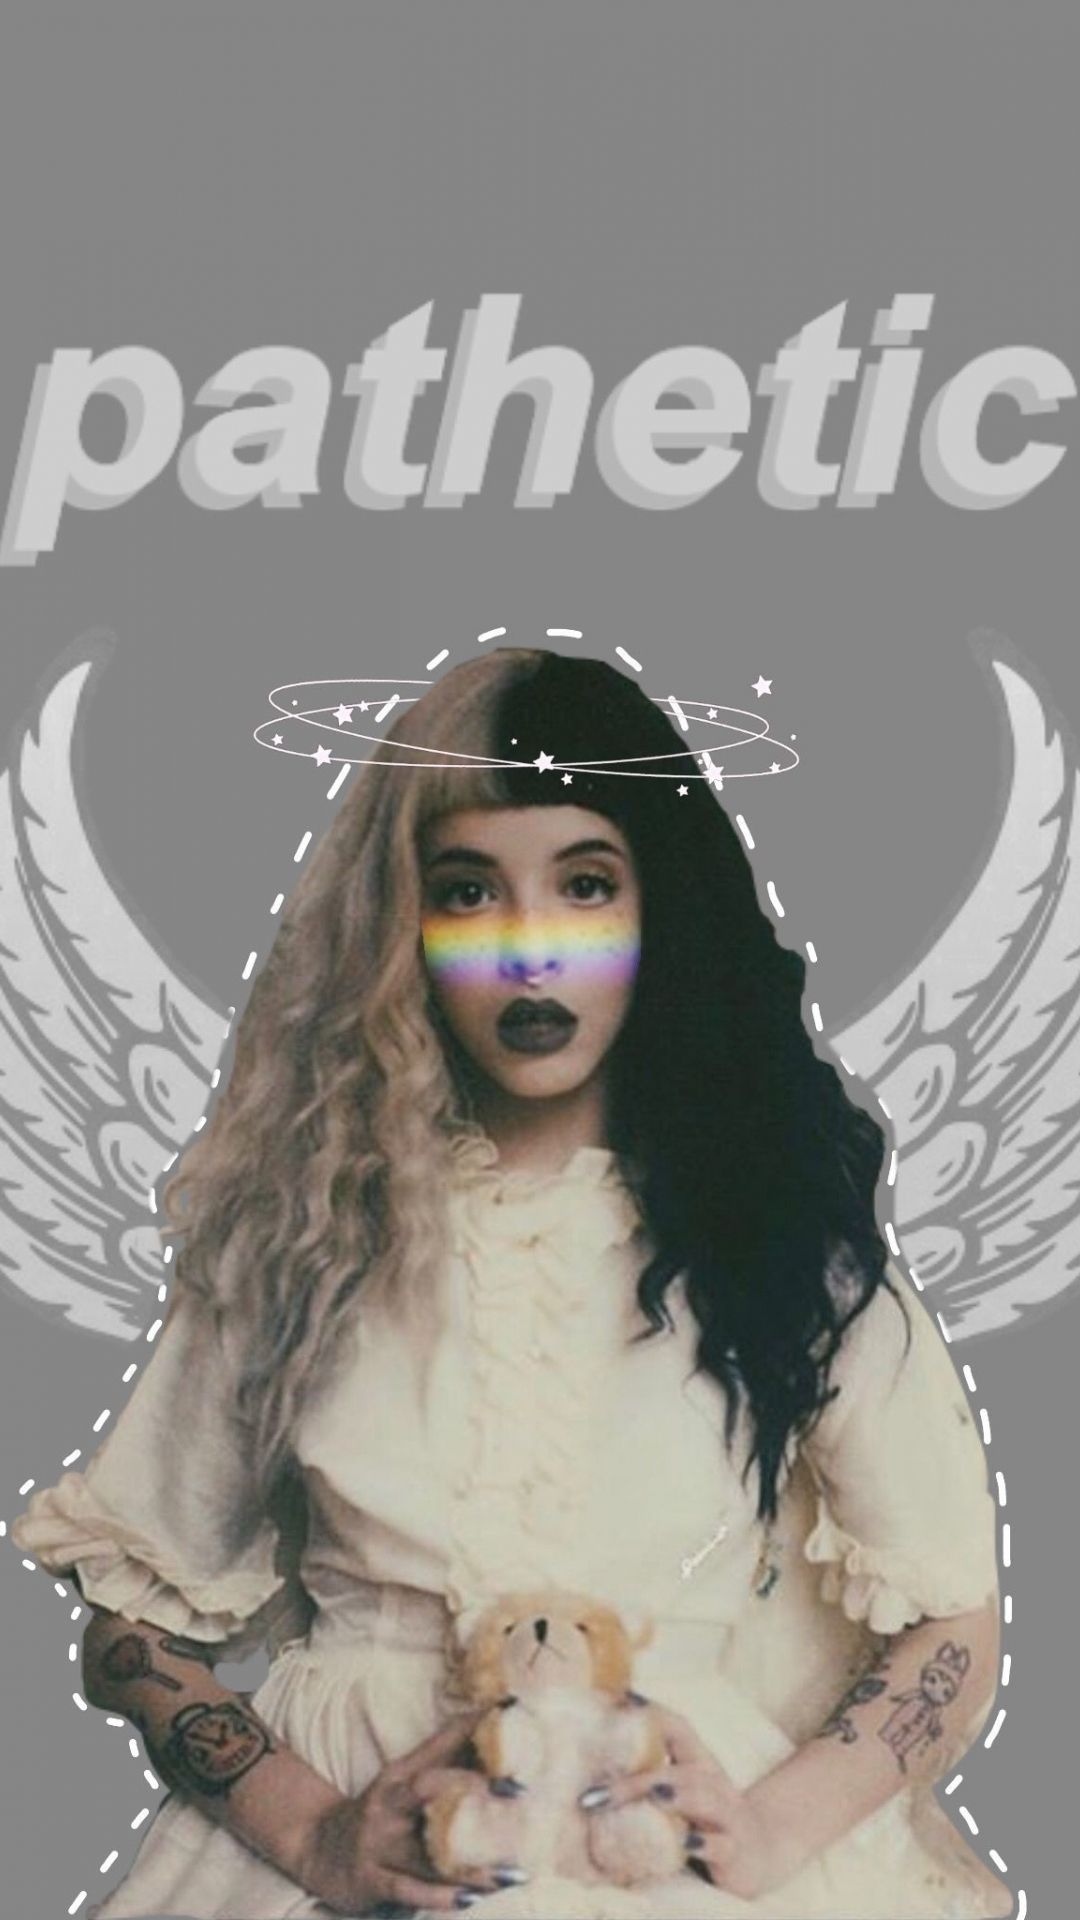 A woman with tattoos and piercings holding teddy bear - Melanie Martinez